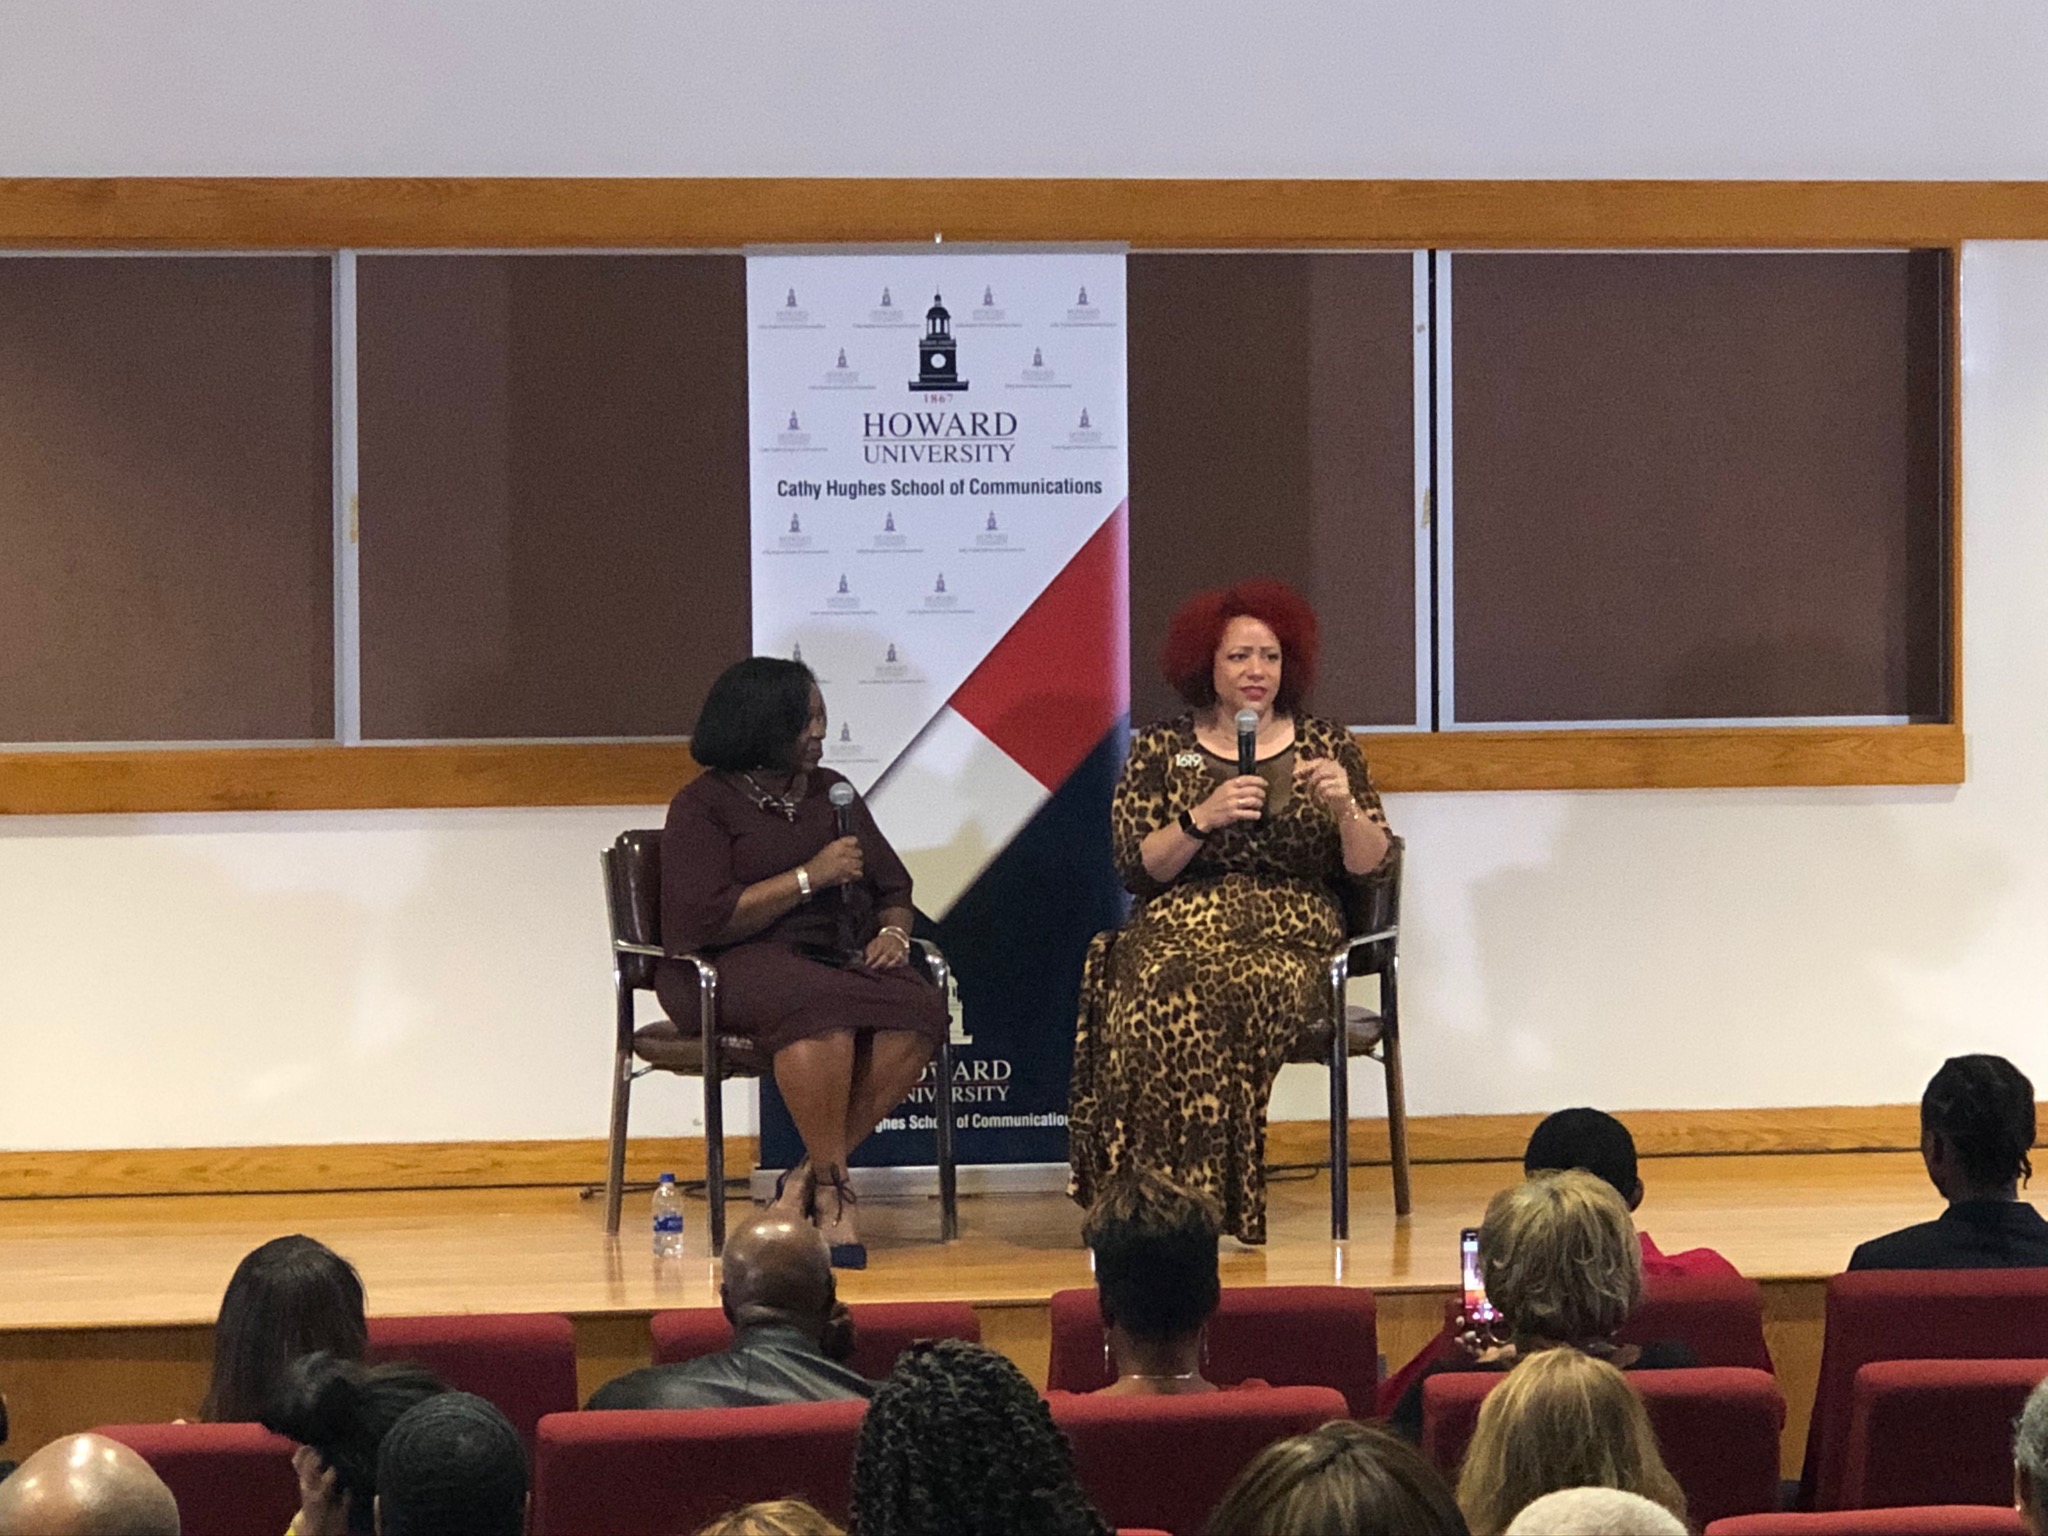 Howard University Hosts “Reframing Our History: The 1619 Project With Nikole Hannah-Jones”